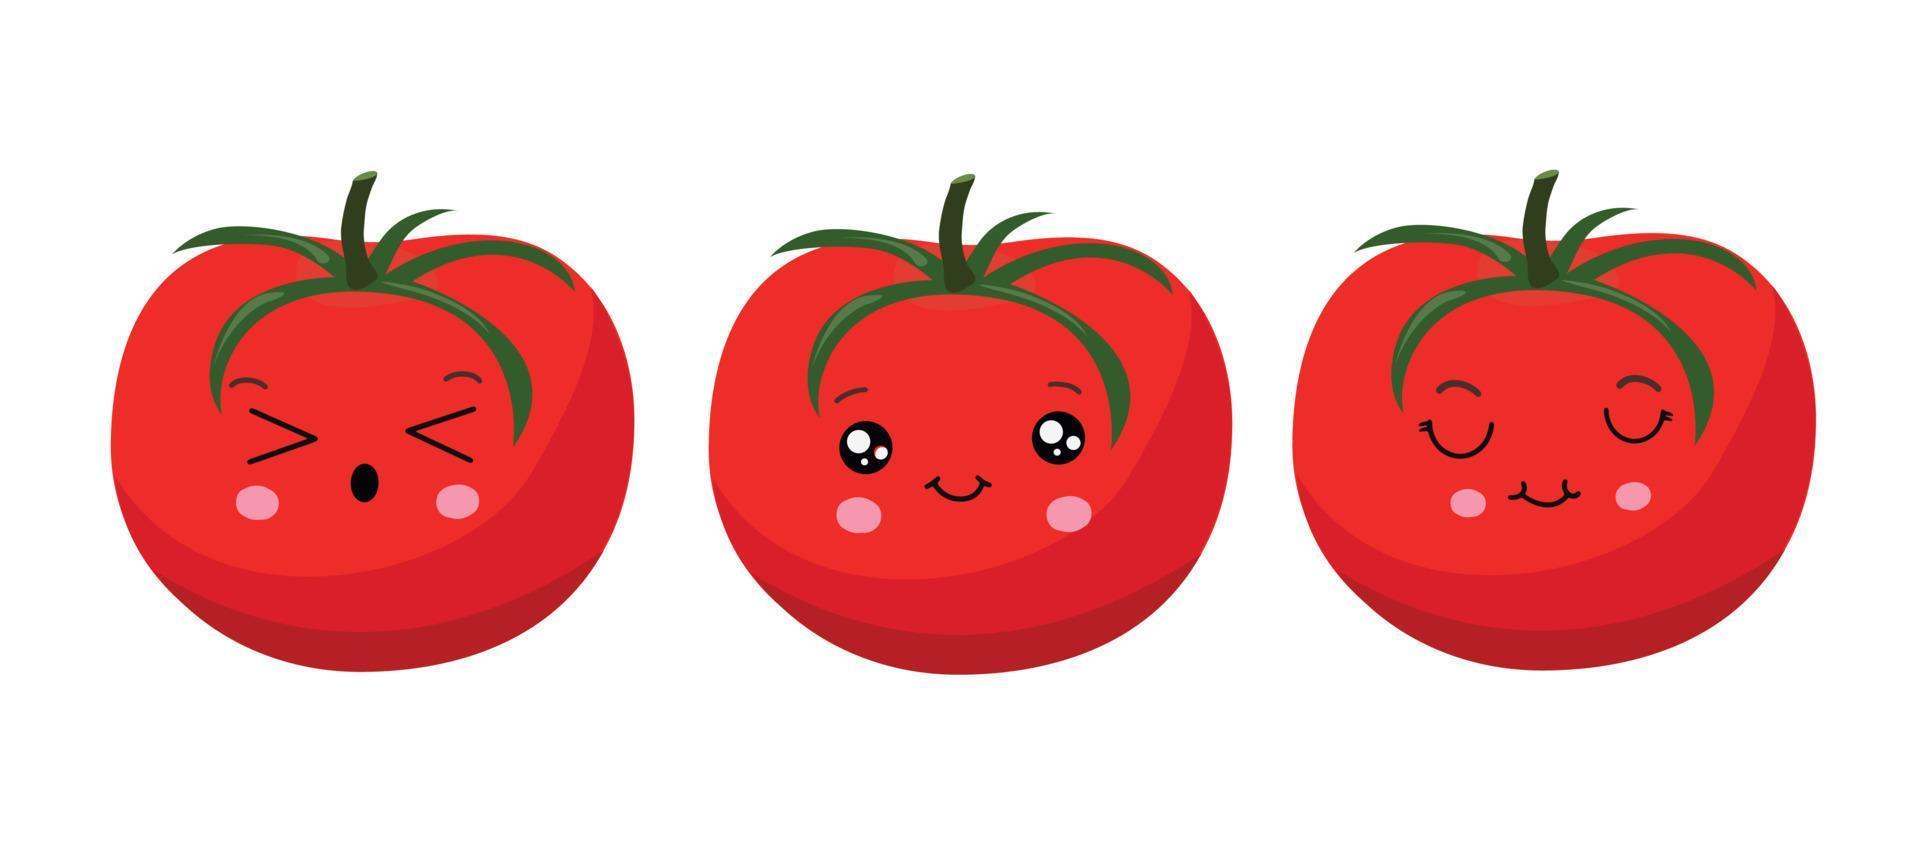 Red tomato in kawaii style. Vector illustration